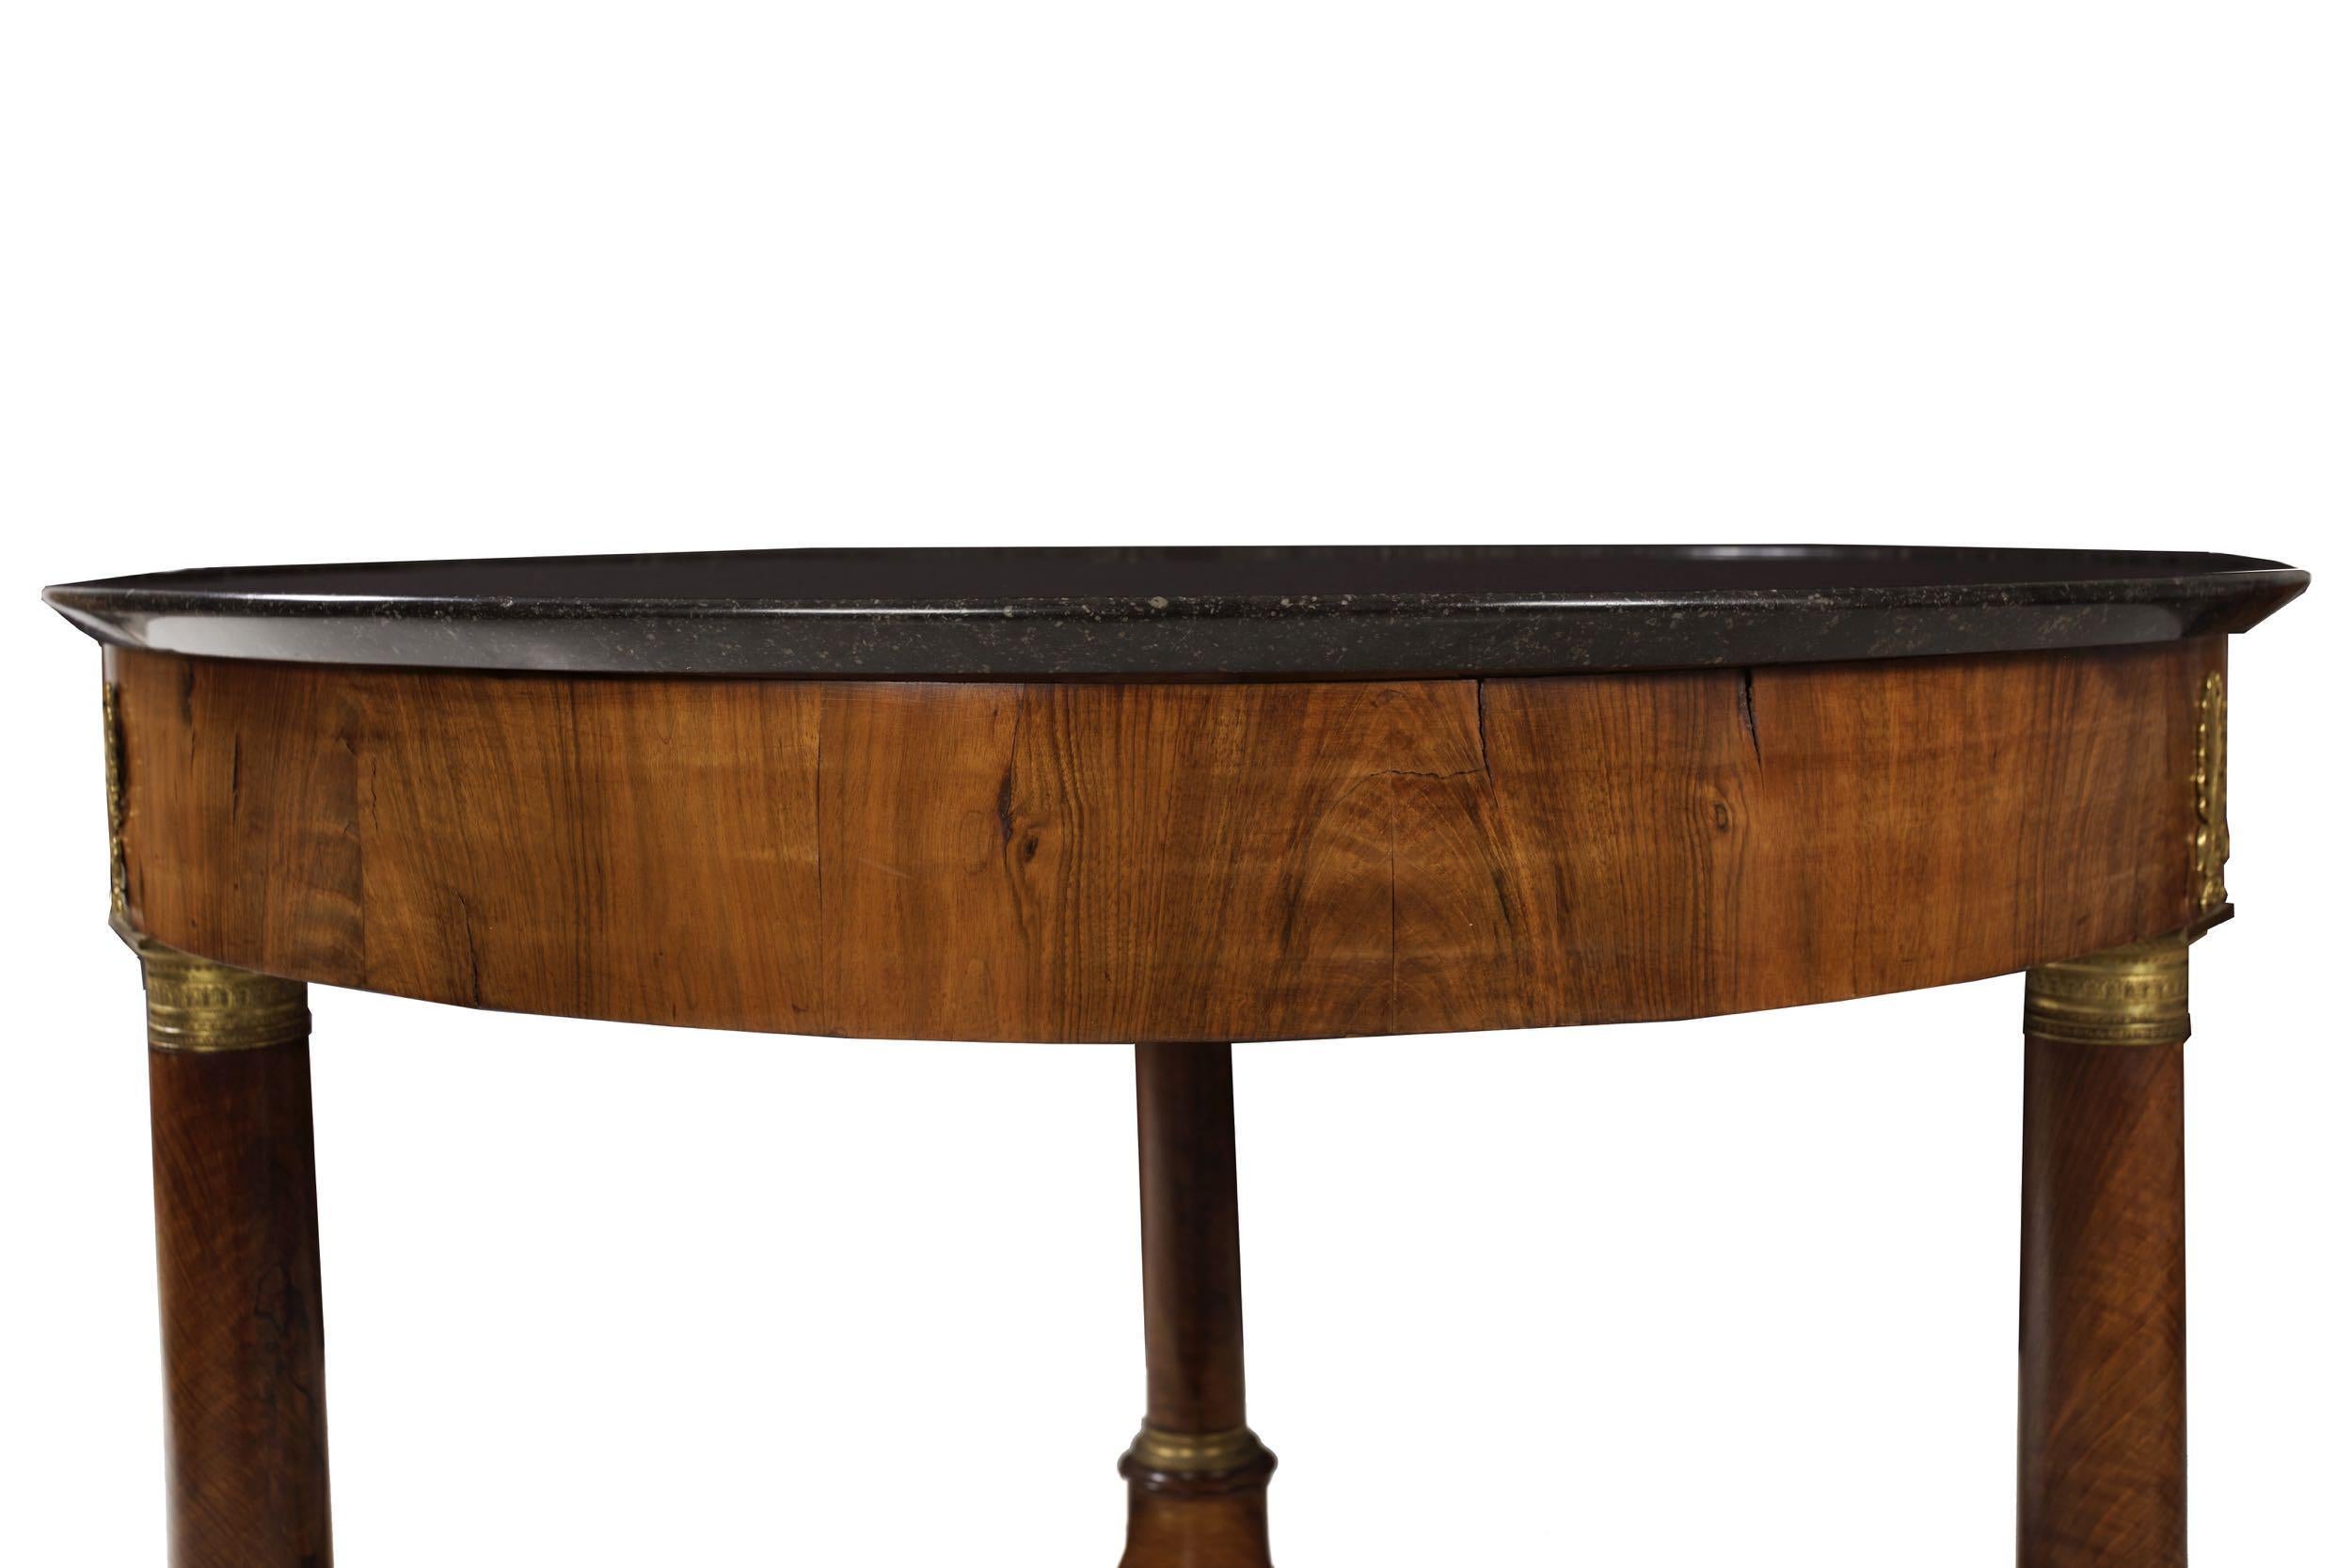 French Empire Antique Burl Walnut Center Table with Black Marble Top, circa 1815 For Sale 7